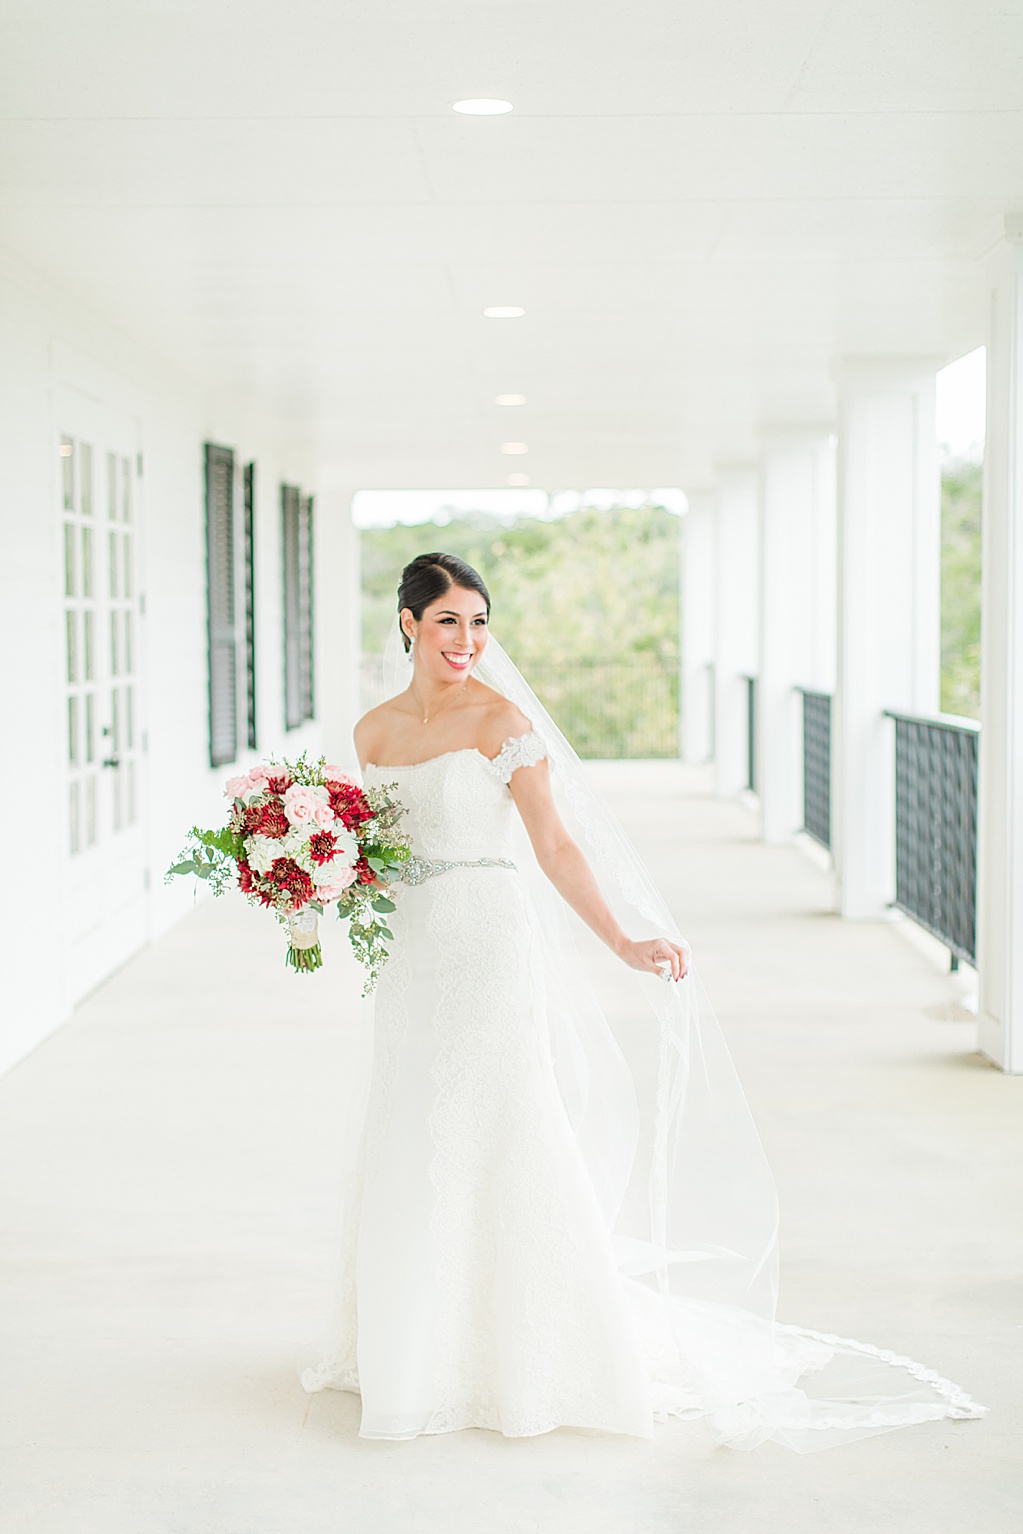 Winter Wedding at Kendall Plantation Hill Country Wedding Venue by Allison Jeffers Photography 0033